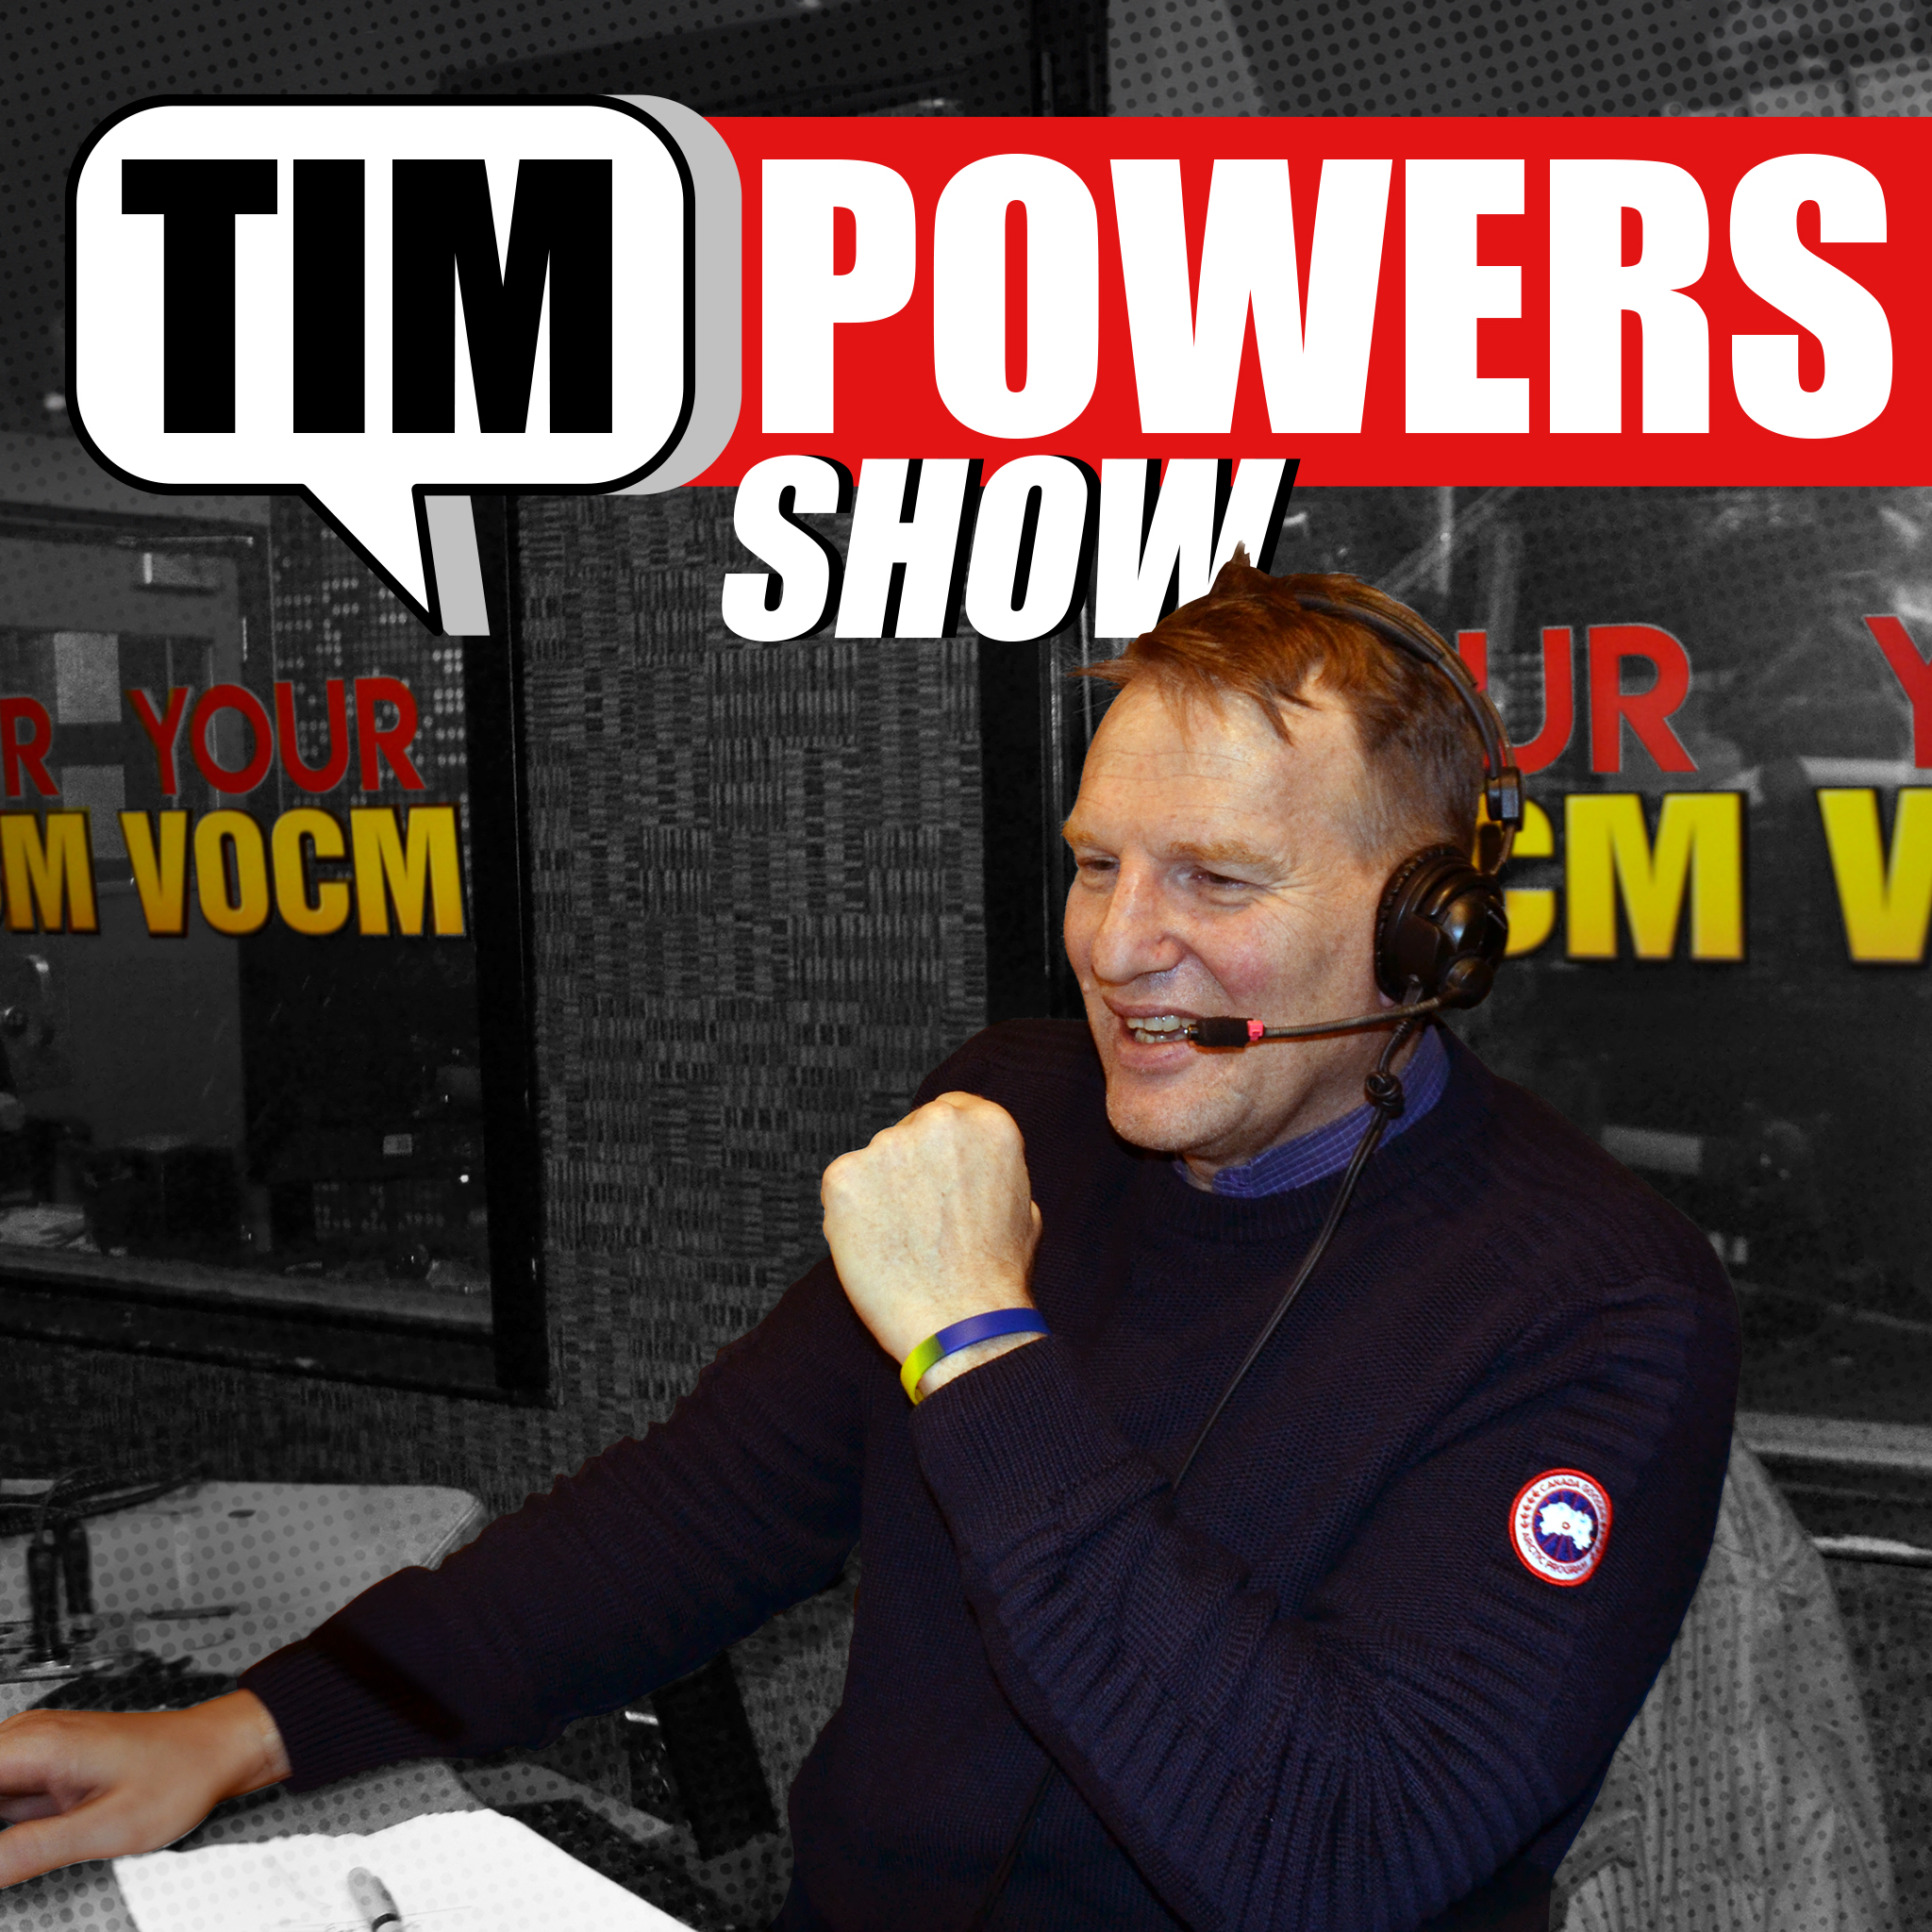 The Tim Powers Show, Friday May 17th